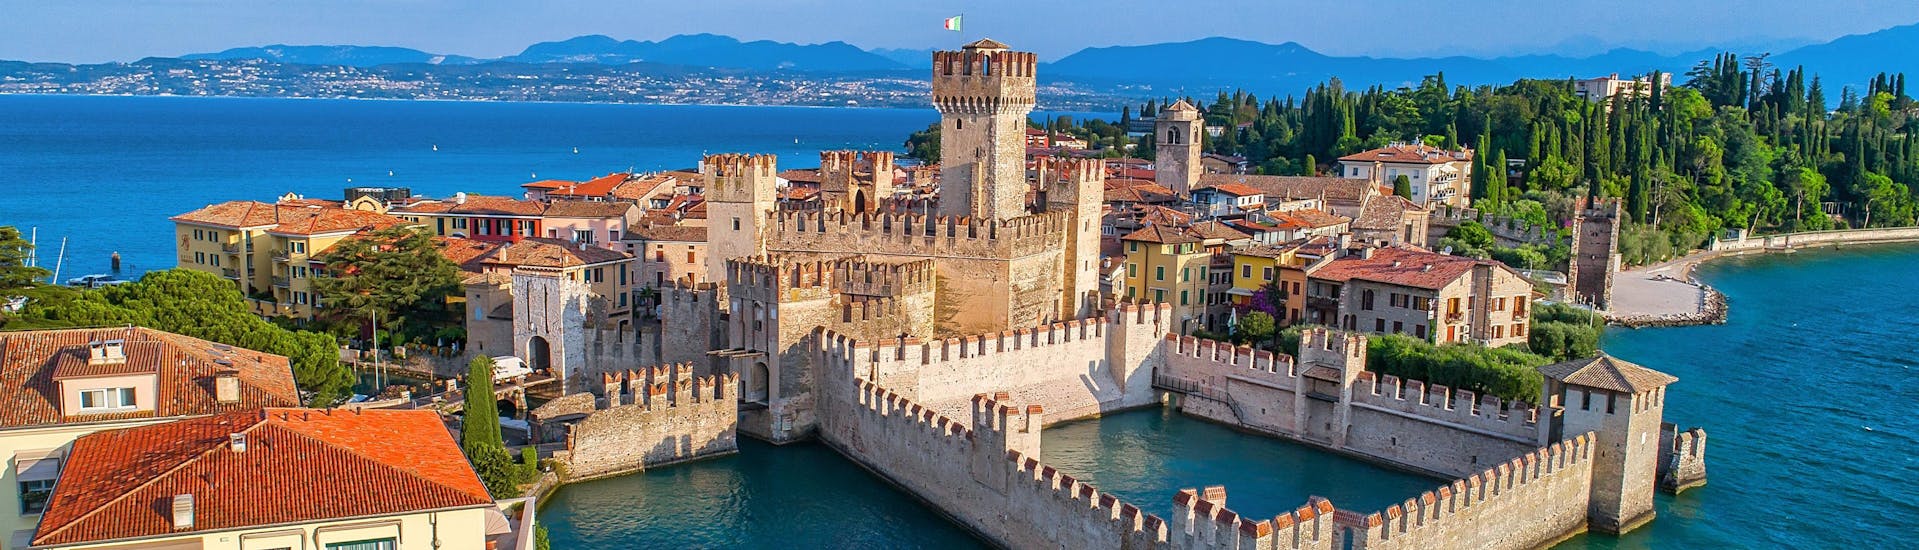 An aerial view of the Scaligero Castle in Sirmione, one of the sights you can see on a boat trip on Lake Garda.